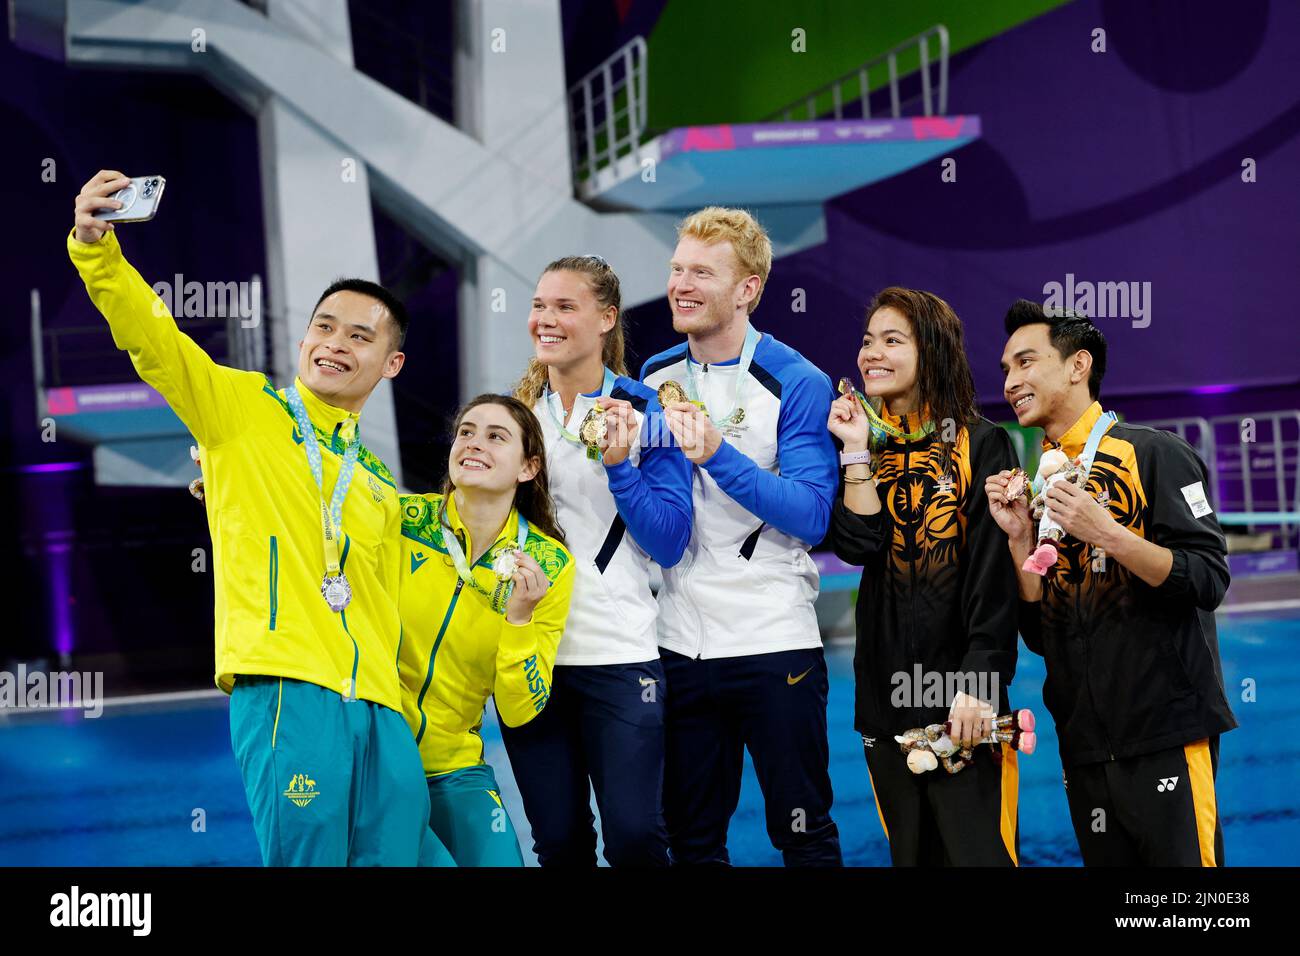 Commonwealth Games - Diving - Mixed Synchronised 3m Springboard - Medal Ceremony - Sandwell Aquatics Centre, Birmingham, Britain - August 8, 2022 Gold medallists Scotland's Grace Elizabeth Reid and James Philip Heatly celebrate on the podium alongside silver medallists Australia's Shixin Li and Maddison Keeney and bronze medallists Malaysia's Nur Dhabitah Binti Sabri and Muhammad Syafiq Bin Puteh during the medal ceremony REUTERS/Stefan Wermuth Stock Photo